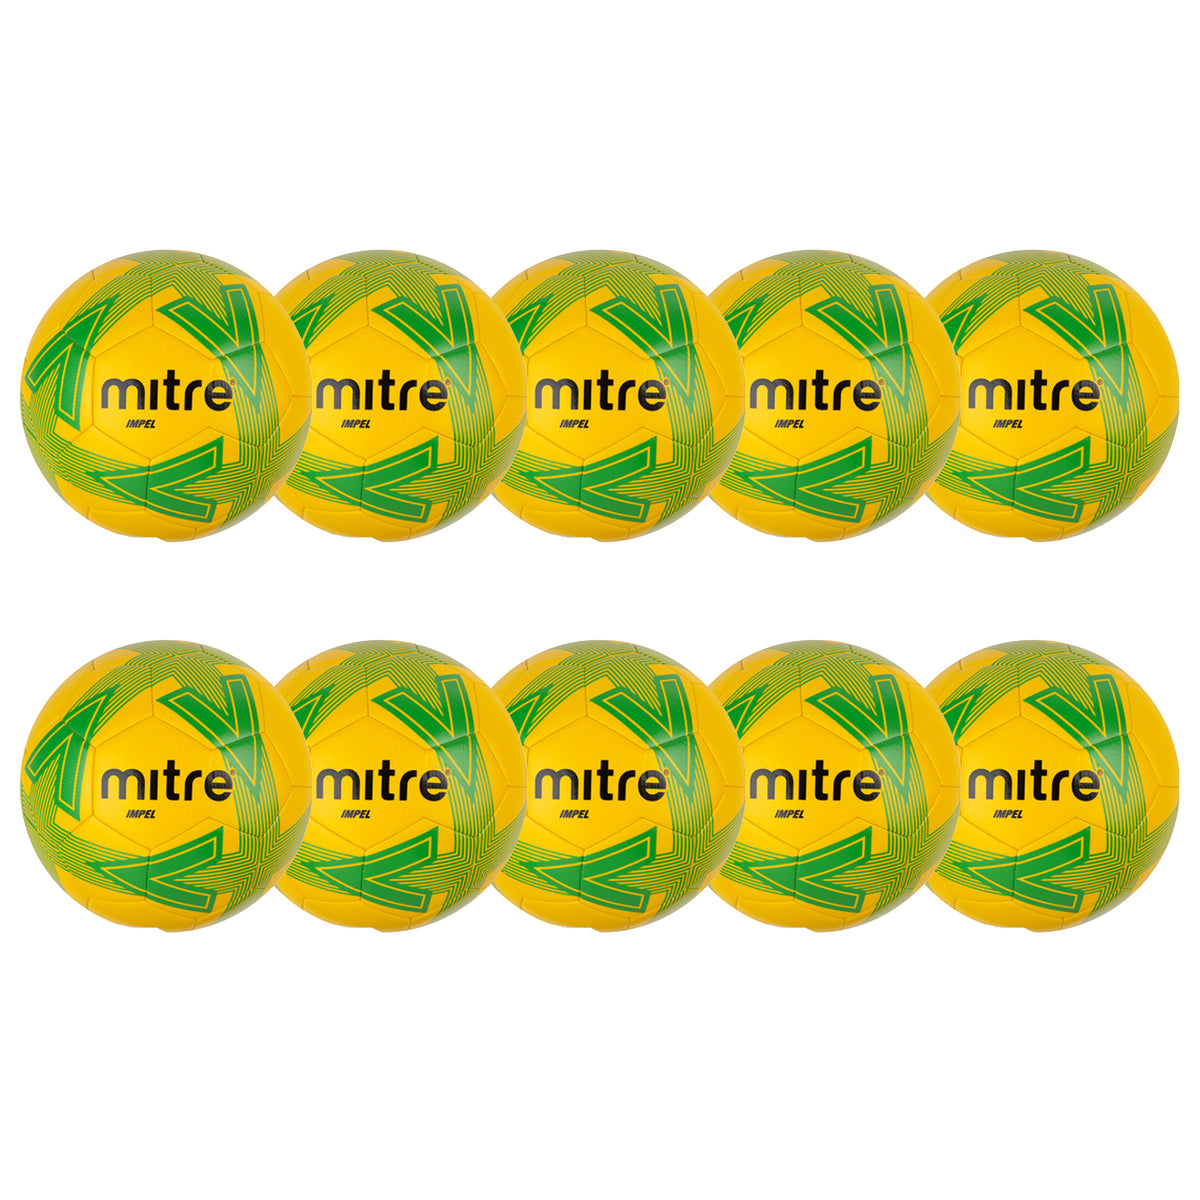 Mitre Impel Football (Pack of 10): Yellow Green